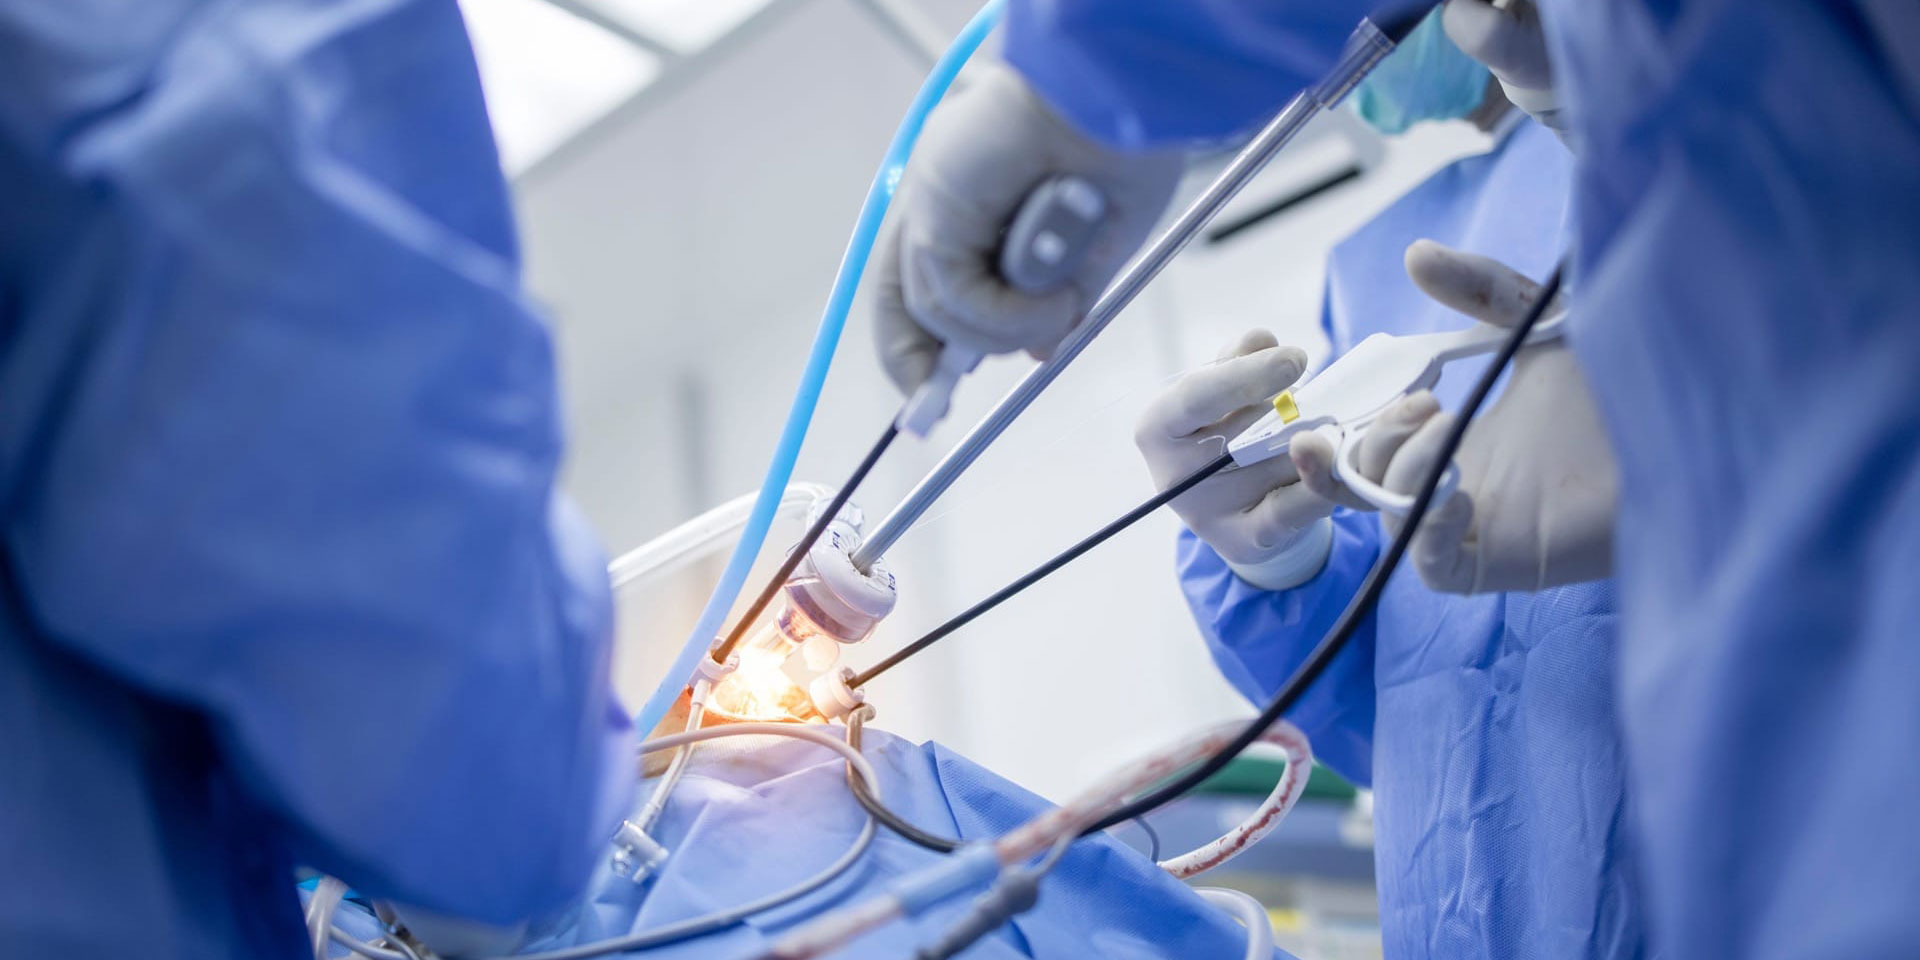 What Is an Orthopedic Surgeon?